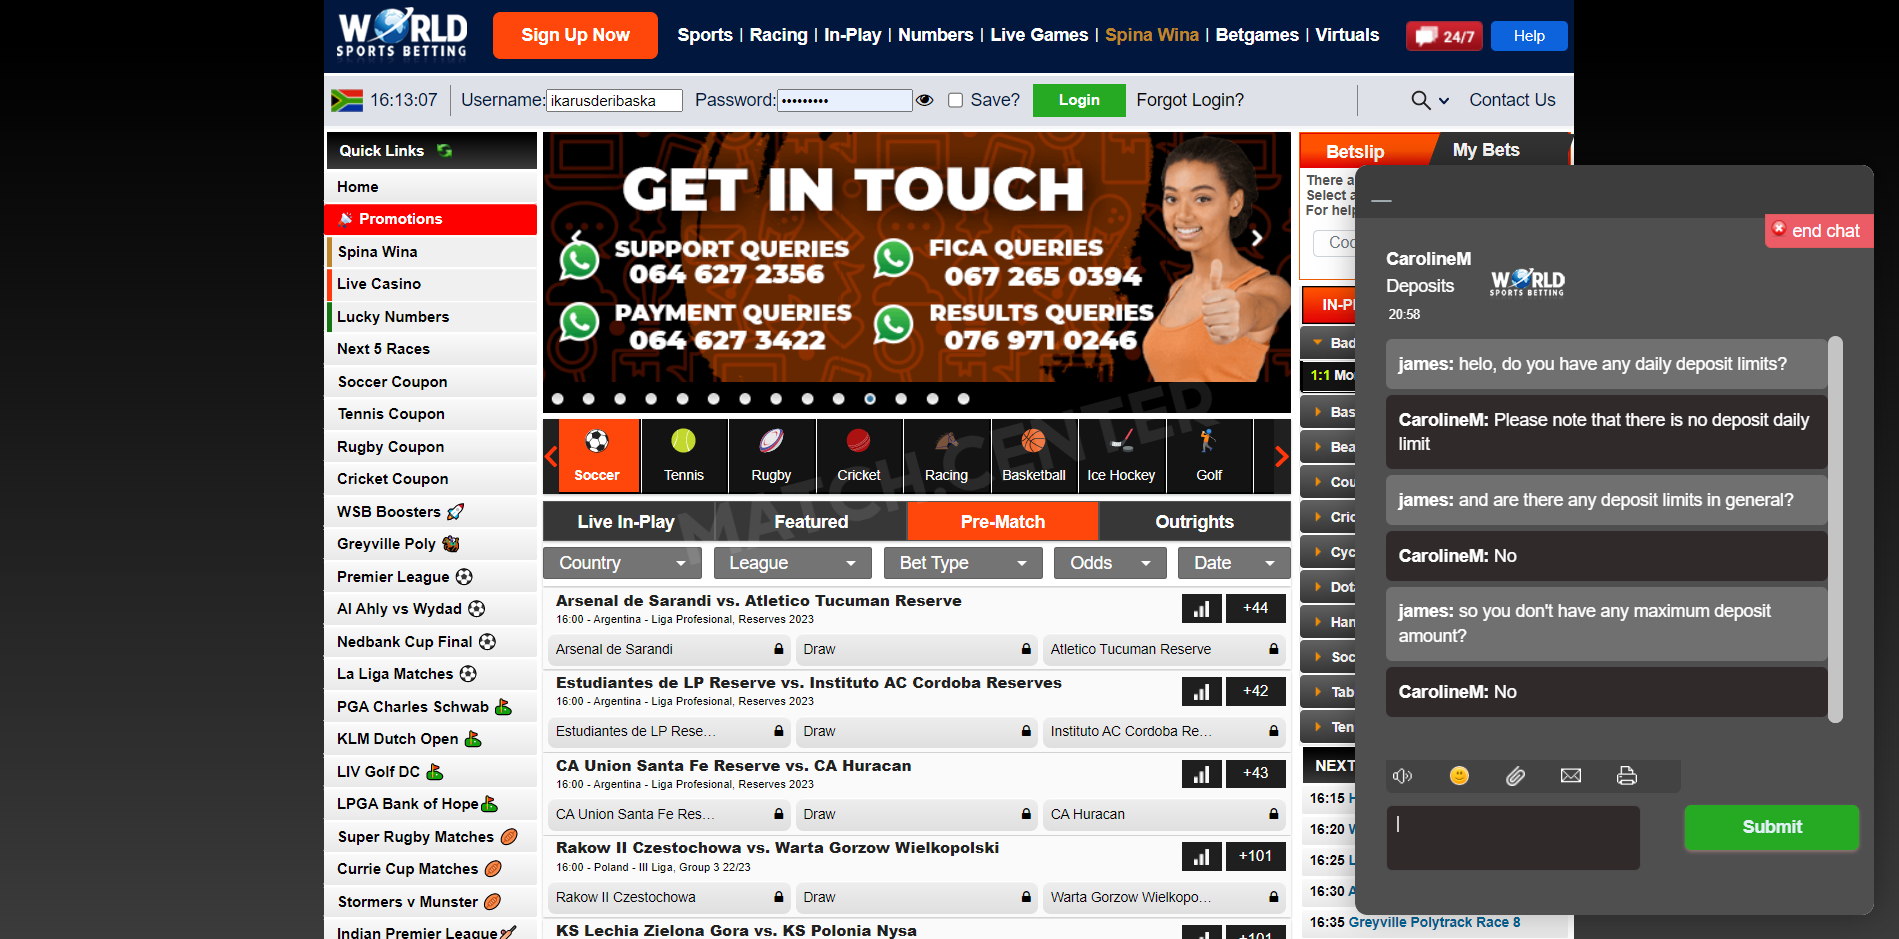 Conversation with World Sports Betting